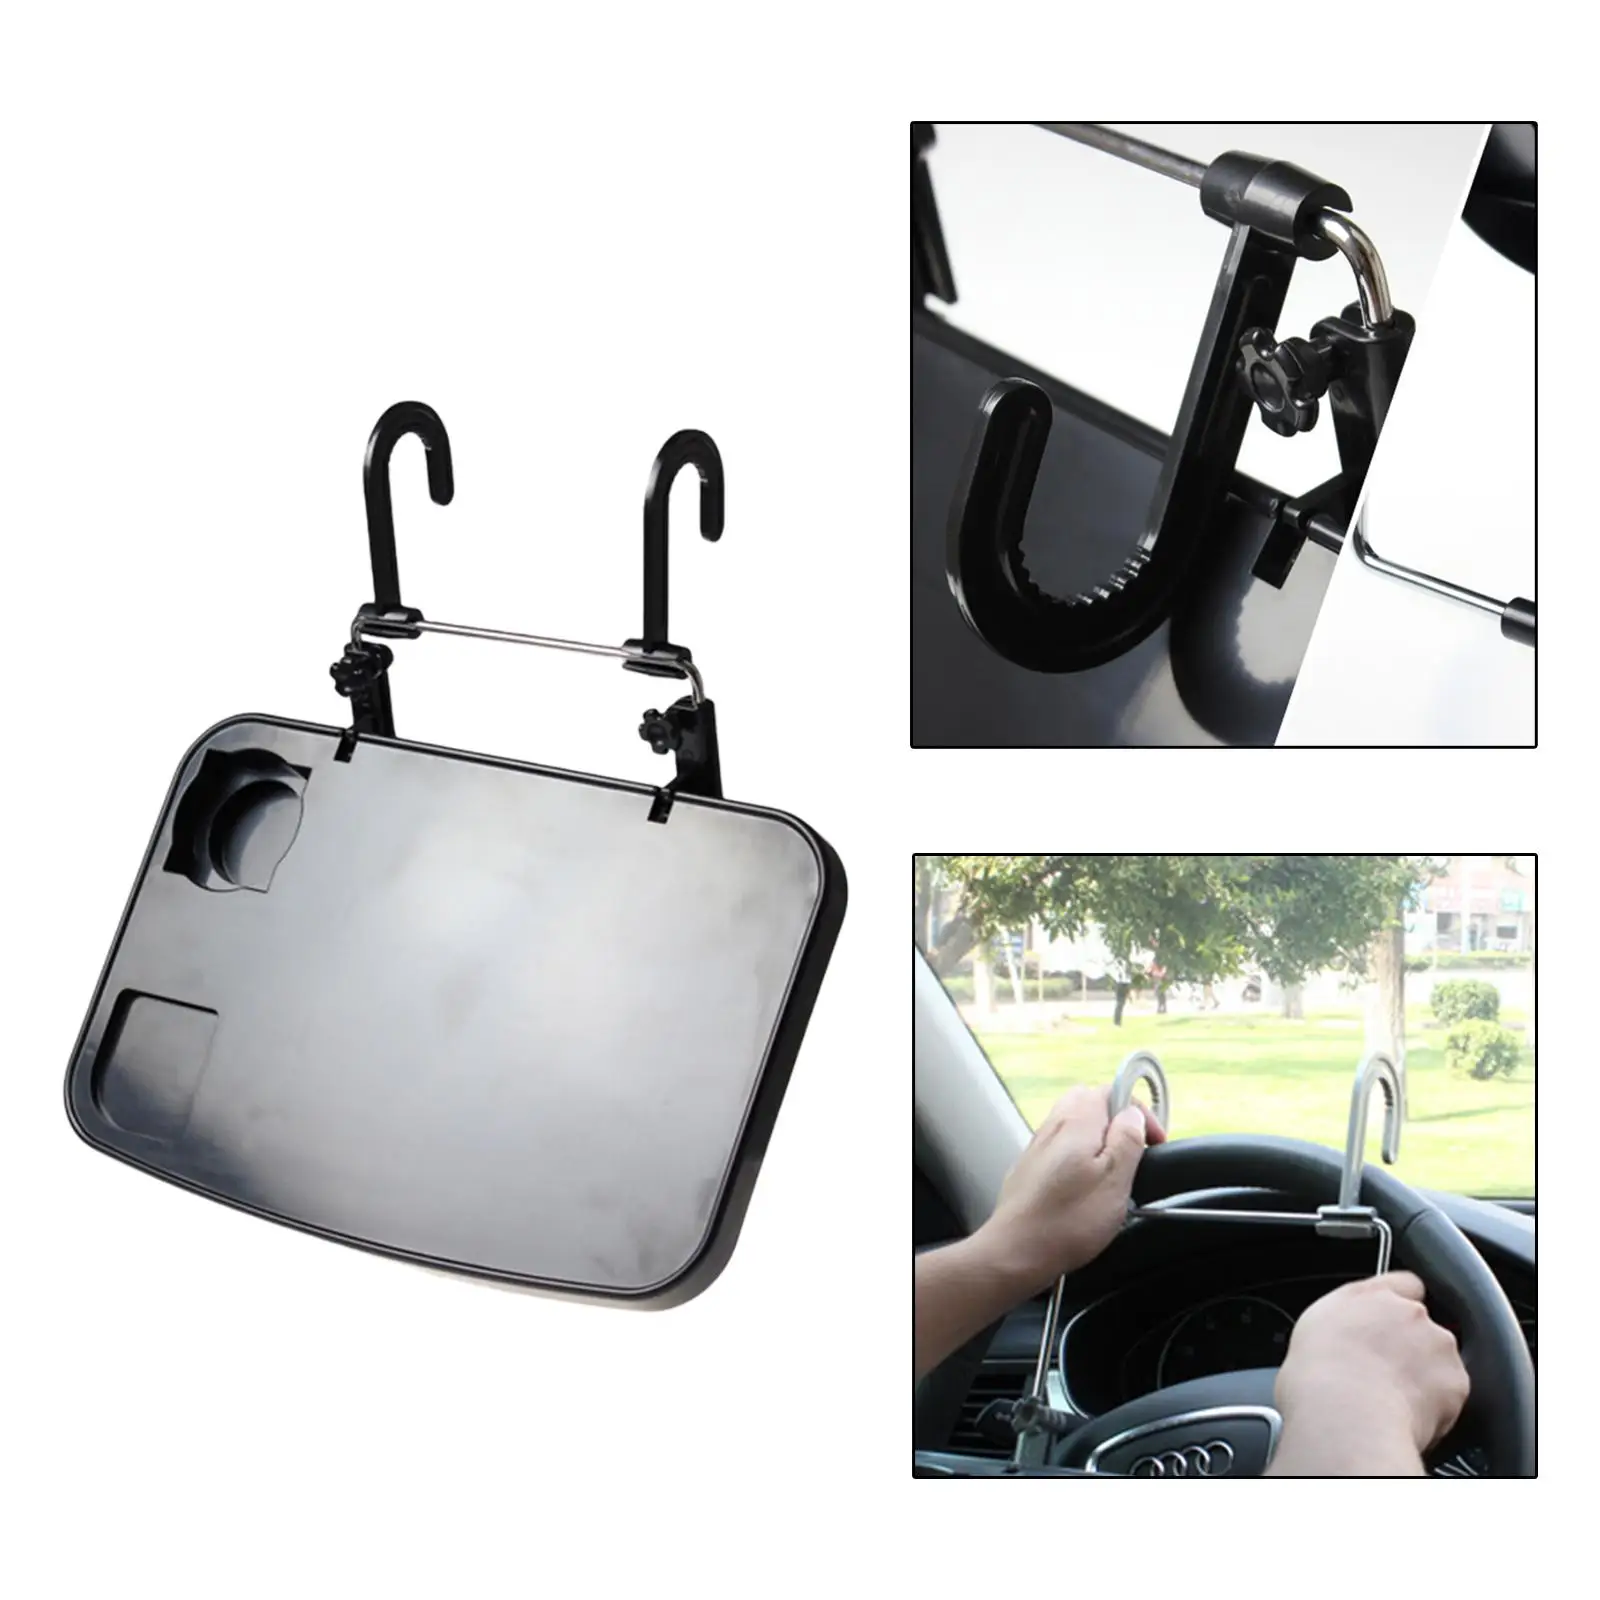 Car Computer Rack Cup Holder Backseat Tray Food   for Tablet